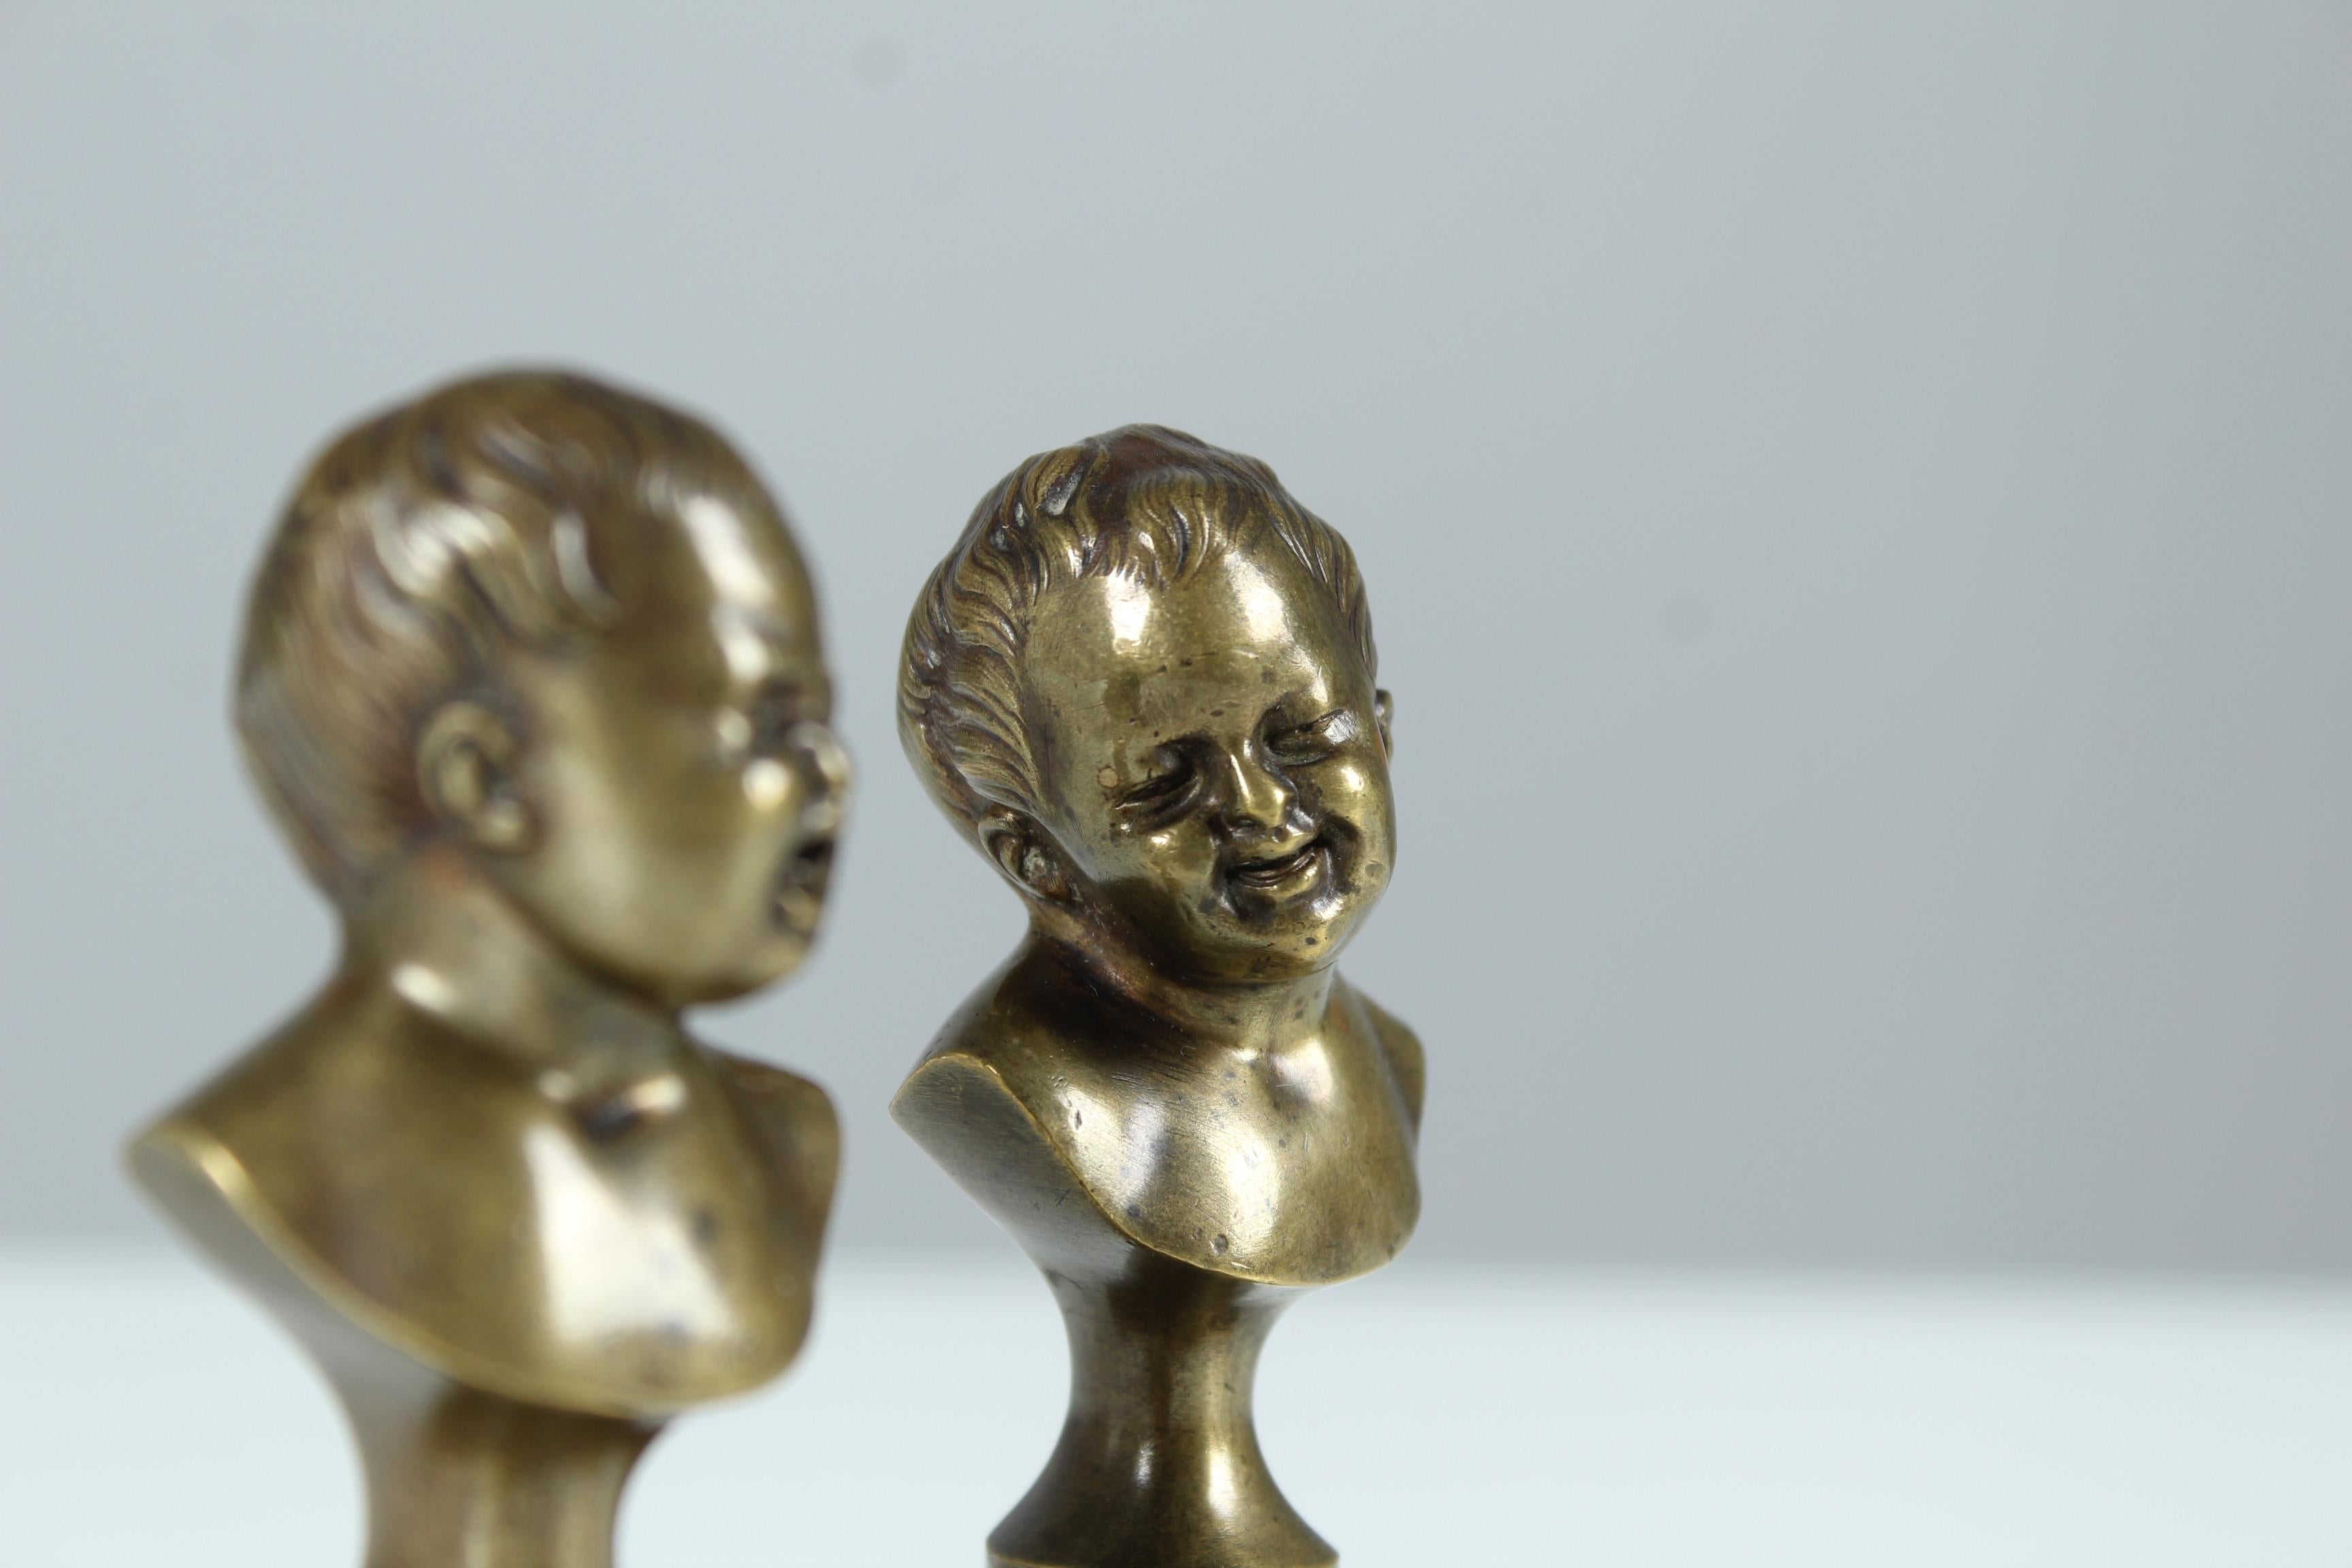 Antique pair of miniature busts of two children, one is crying and one is laughing.
Beautiful bronze work, nicely chiseled and polished.
France, late 19th Century.

